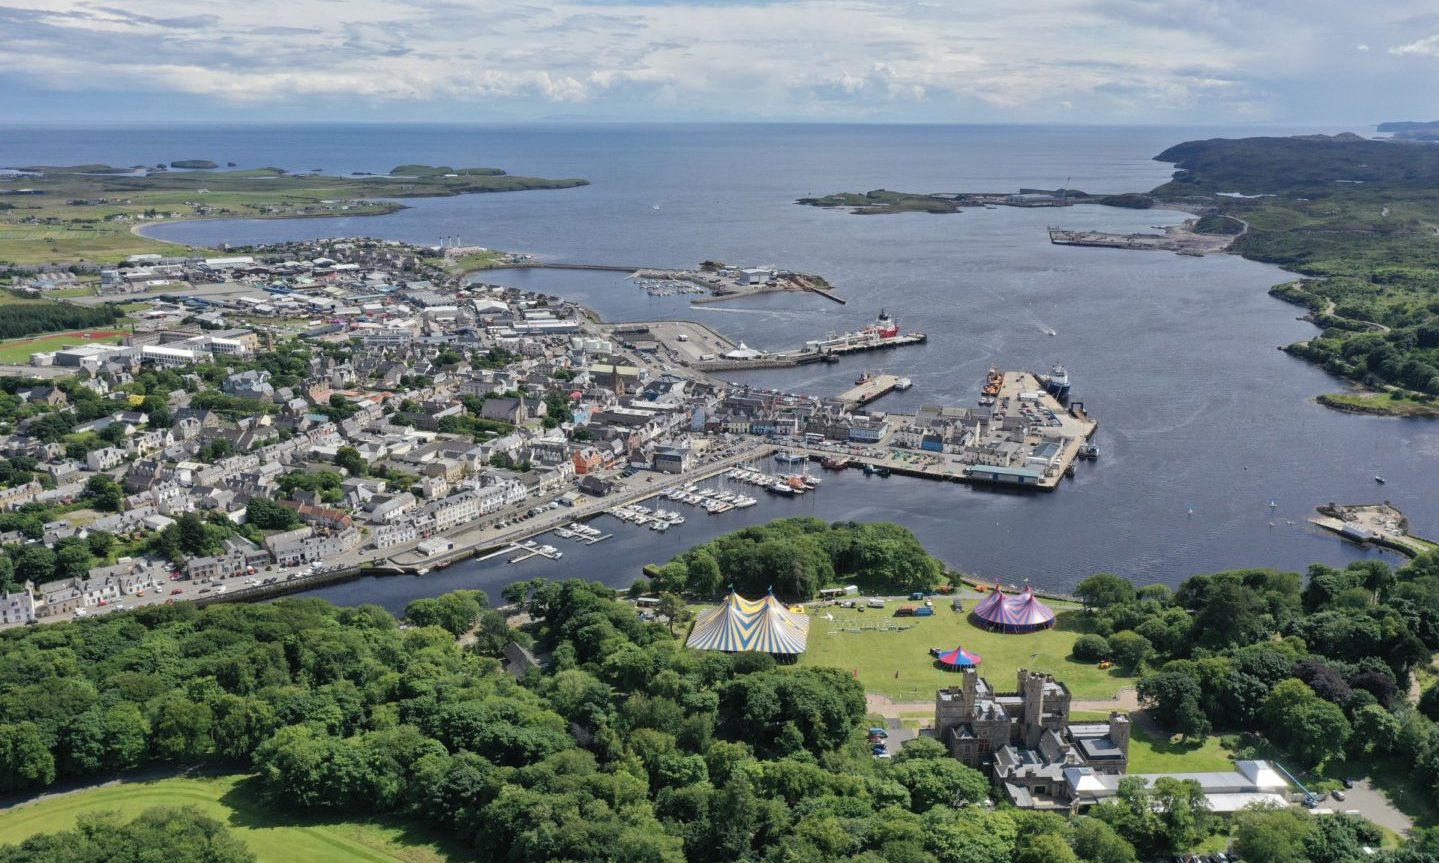 Shipbuilding returning to Stornoway for first time in 100 years